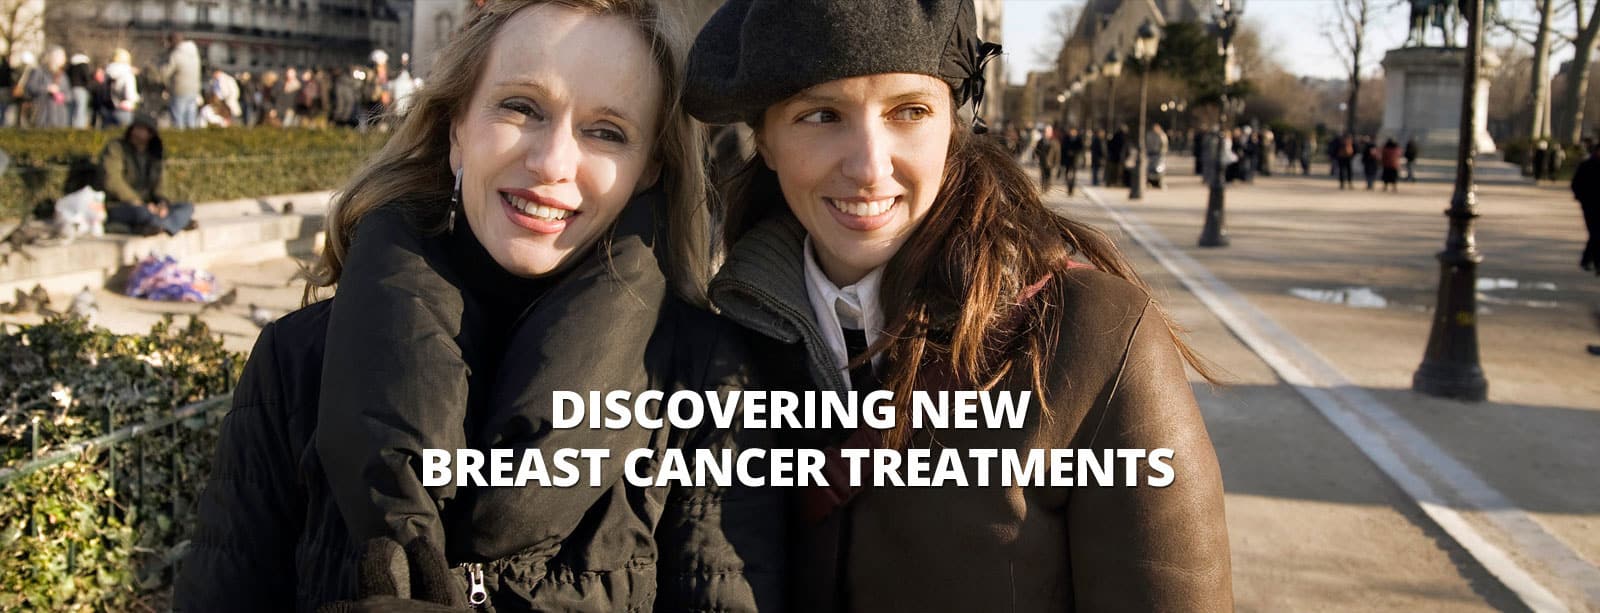 Discovering New Breast Cancer Treatments